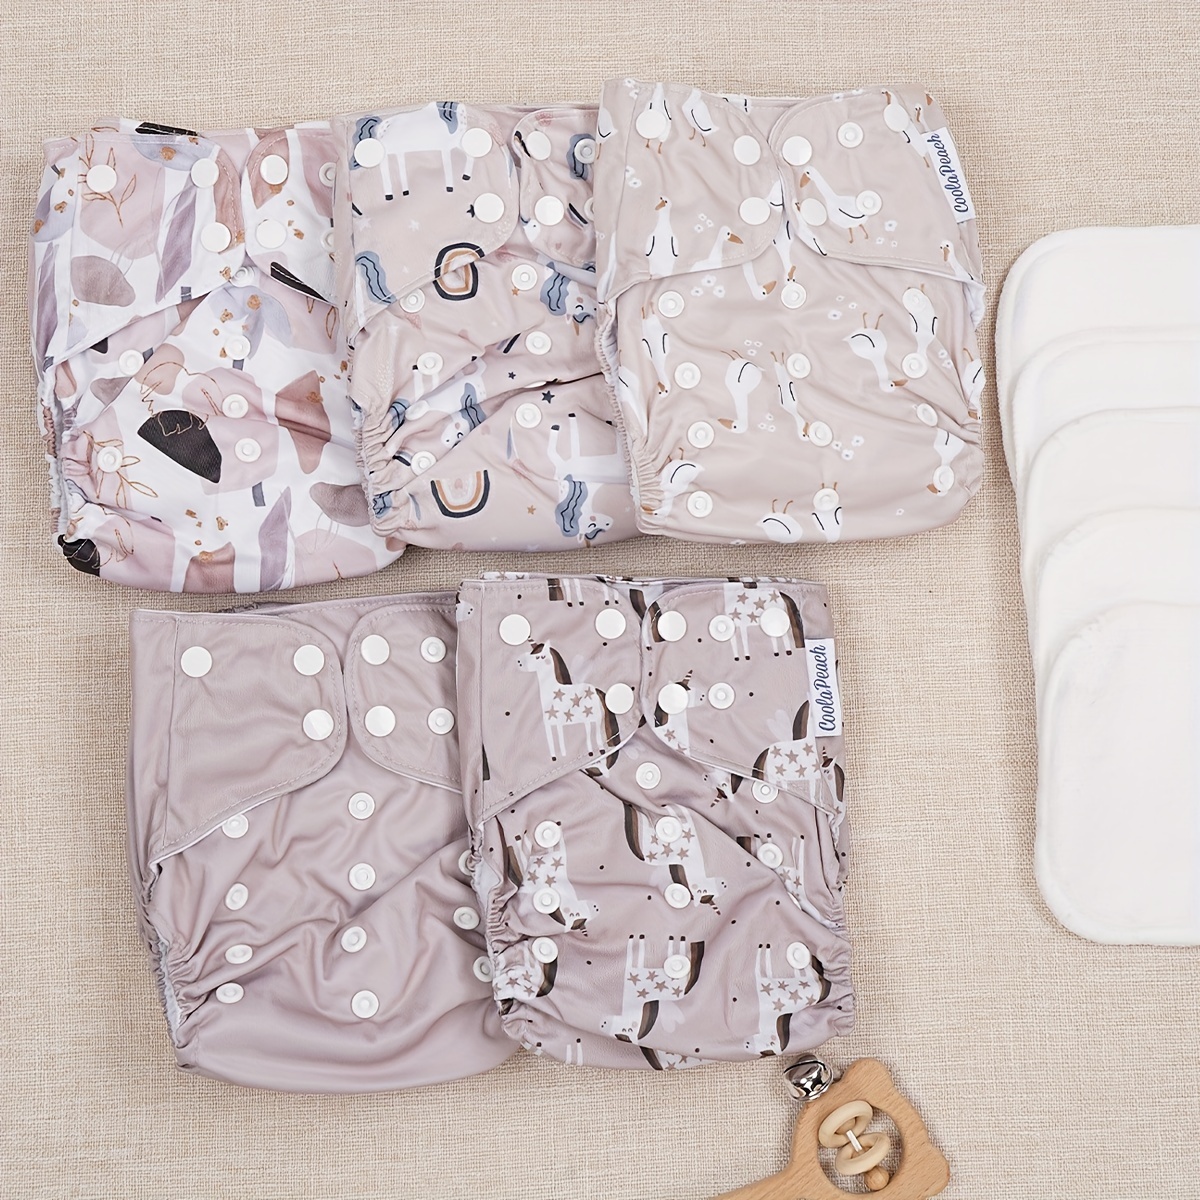  Newborn Baby Cloth Diaper Cover Nappy Hook And Loop